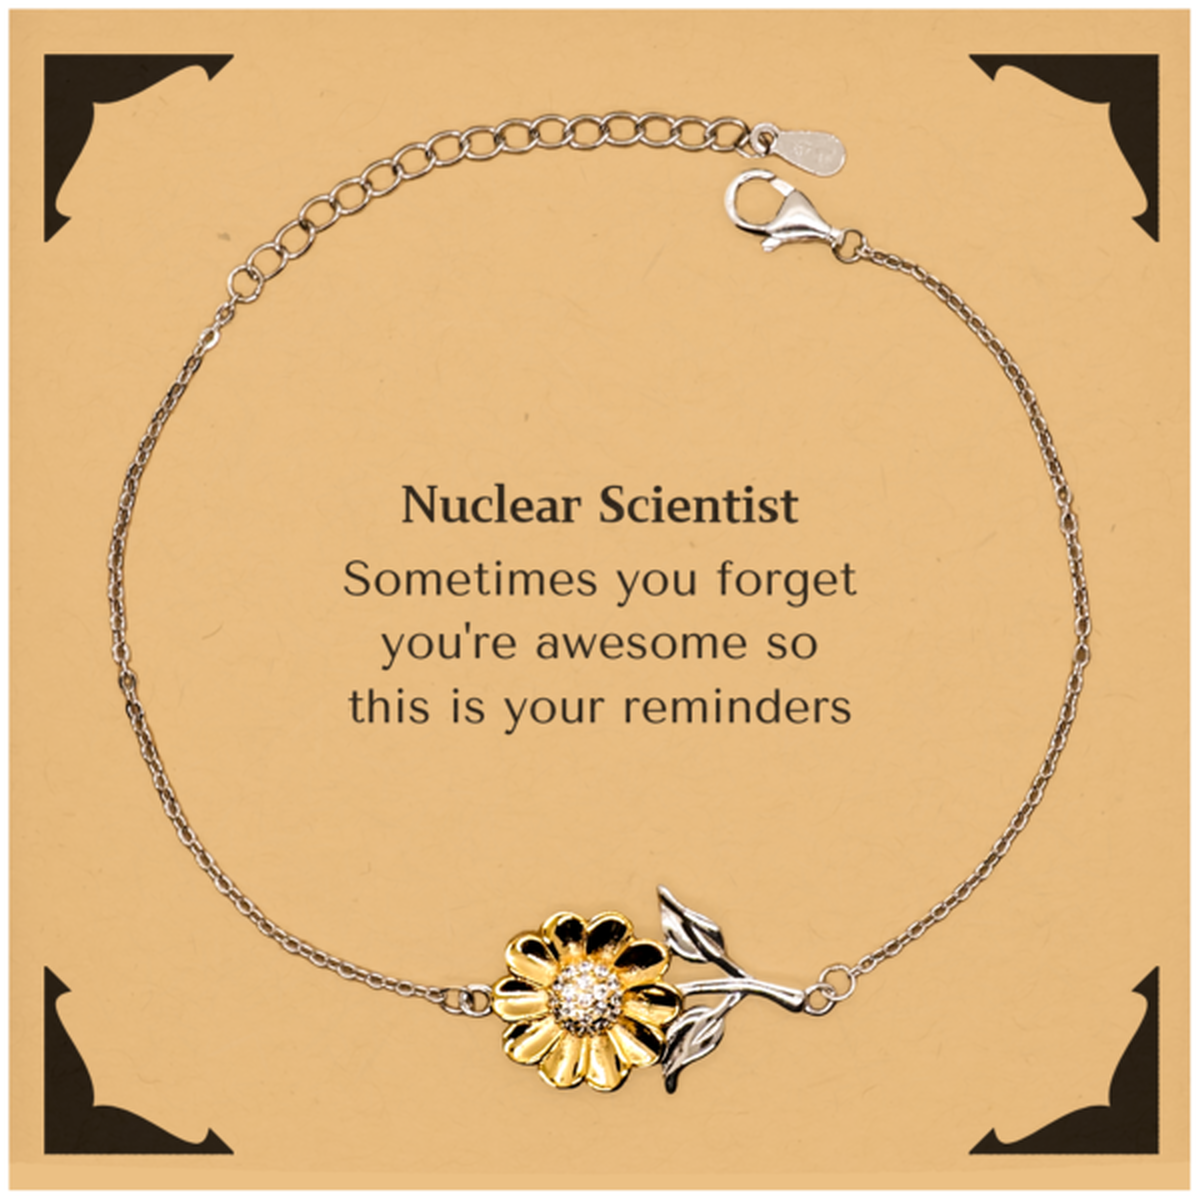 Sentimental Nuclear Scientist Sunflower Bracelet, Nuclear Scientist Sometimes you forget you're awesome so this is your reminders, Graduation Christmas Birthday Gifts for Nuclear Scientist, Men, Women, Coworkers